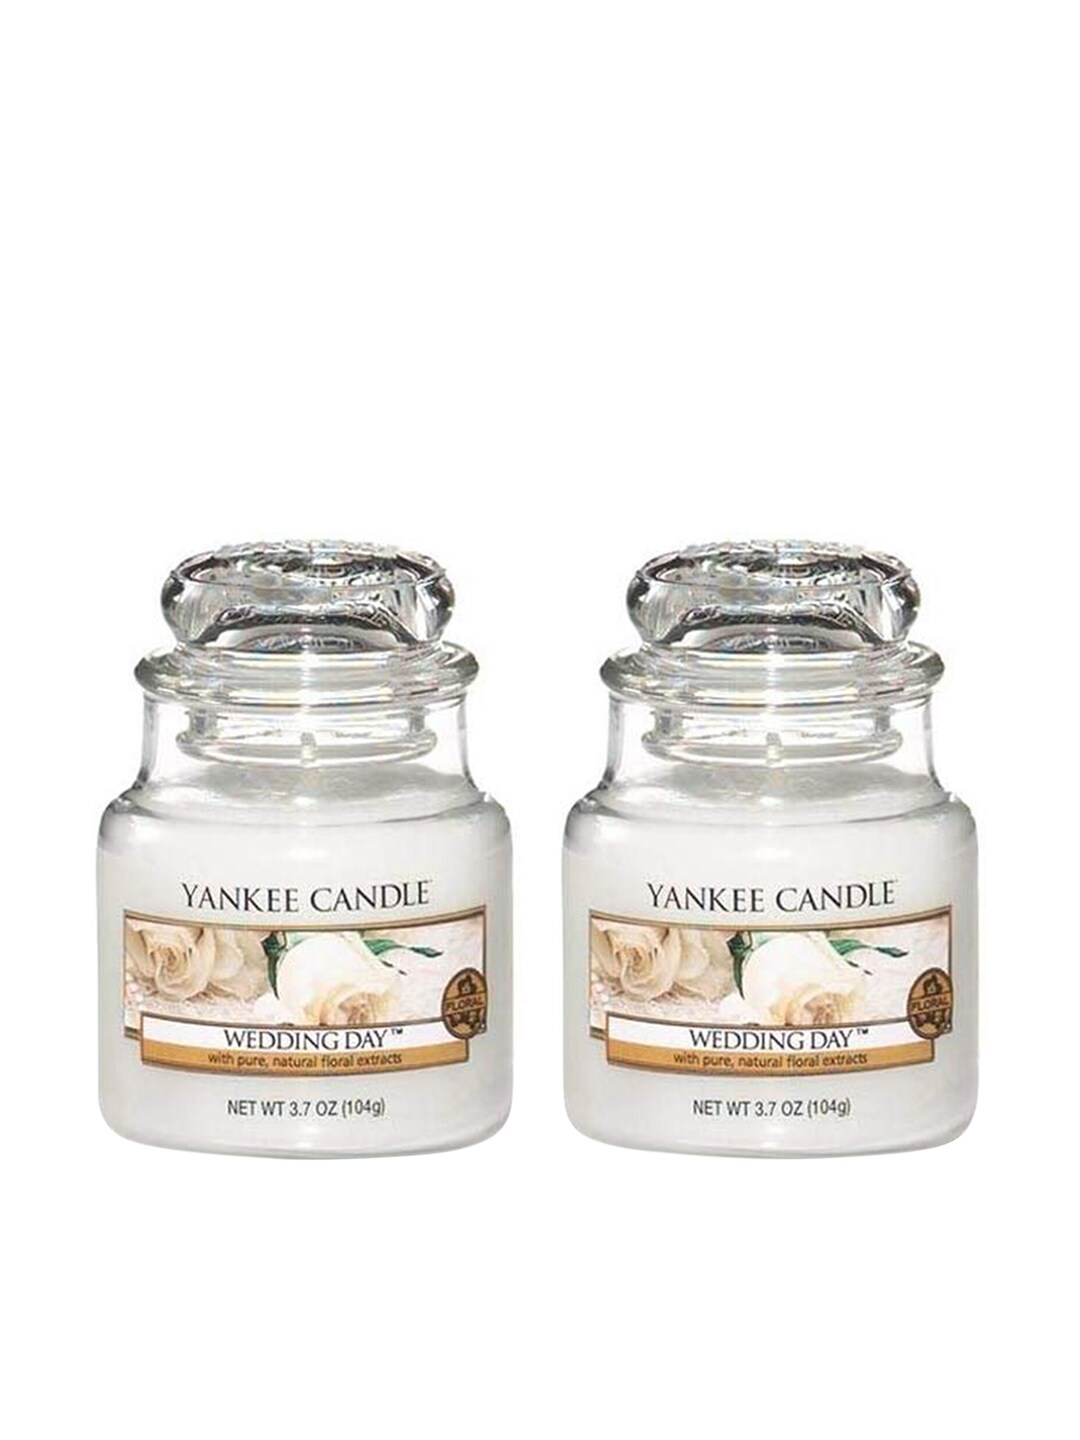 YANKEE CANDLE Set Of 2 White Classic Wedding Day Scented Jar Candles Price in India